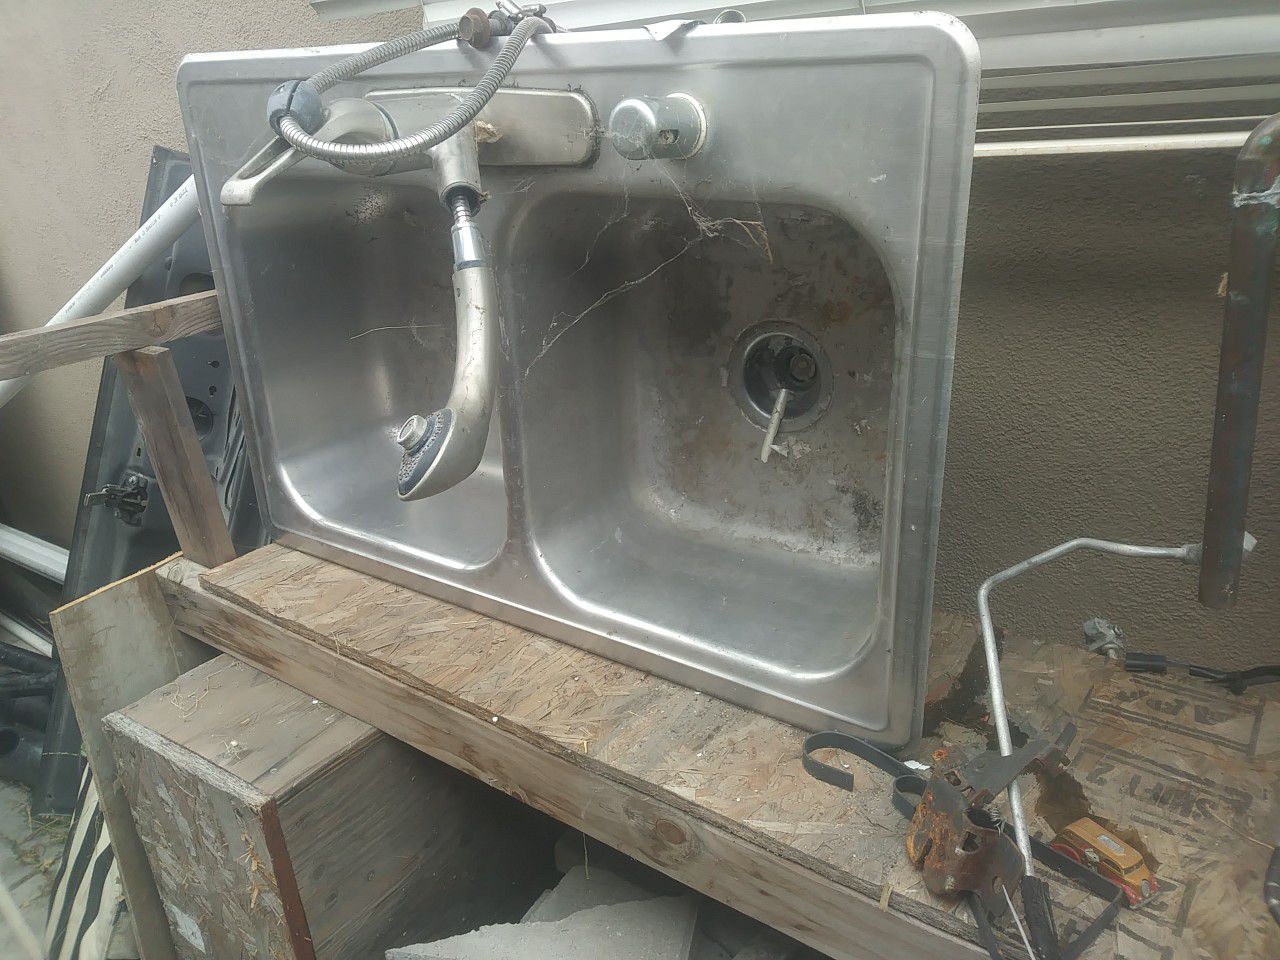 Stainles kitchen sink with faucet 33x22 inches